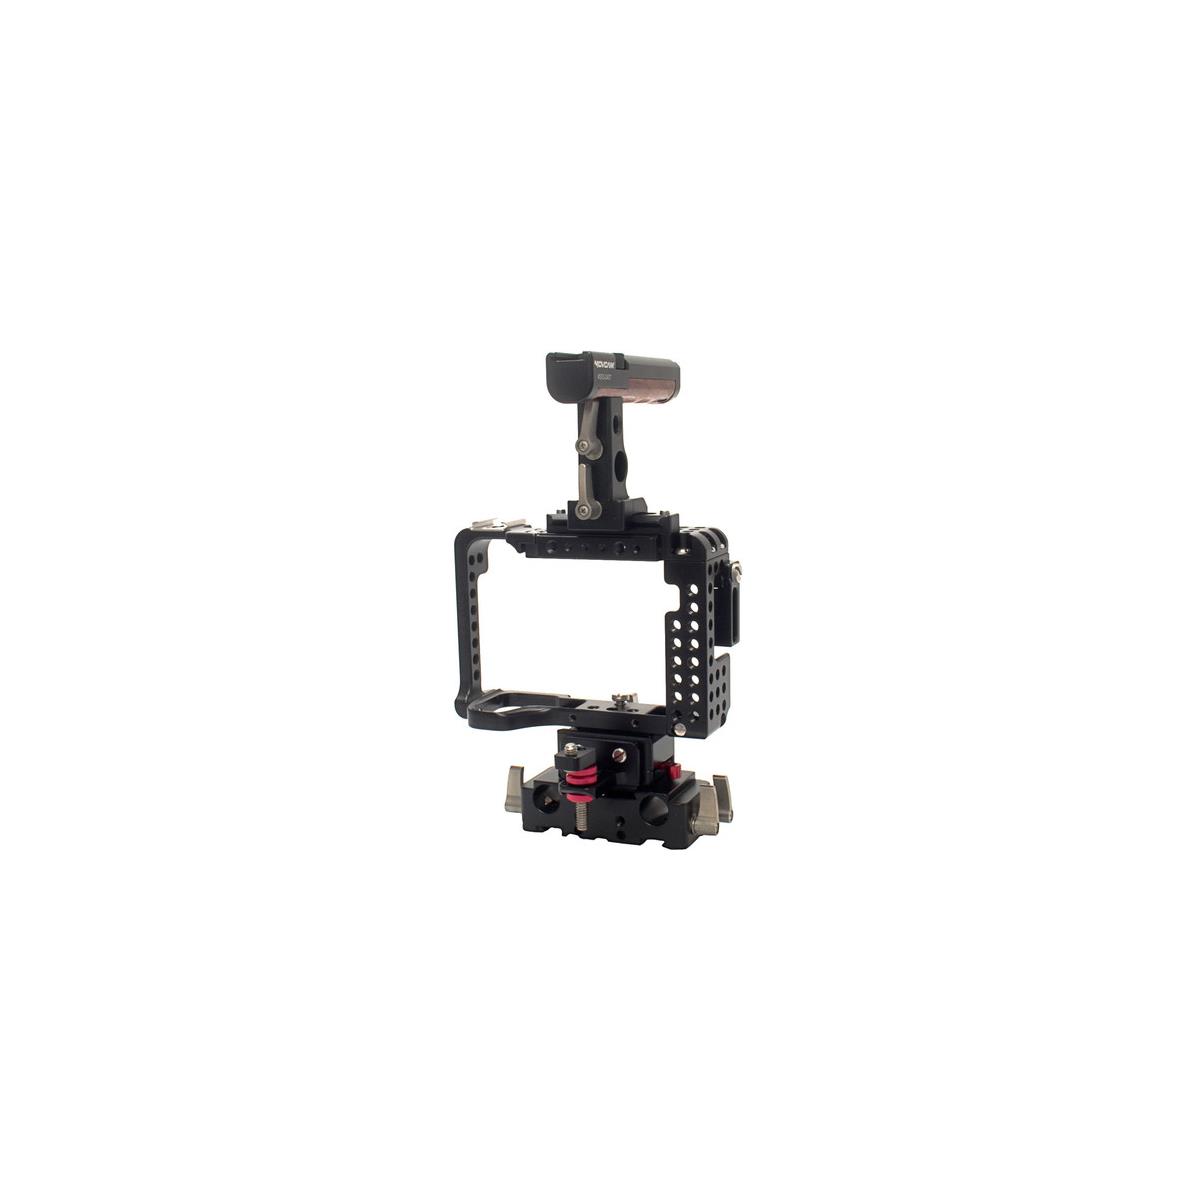 

Movcam Twist Cage Kit Plus Access for Sony a7 II / a7R II / a7S II